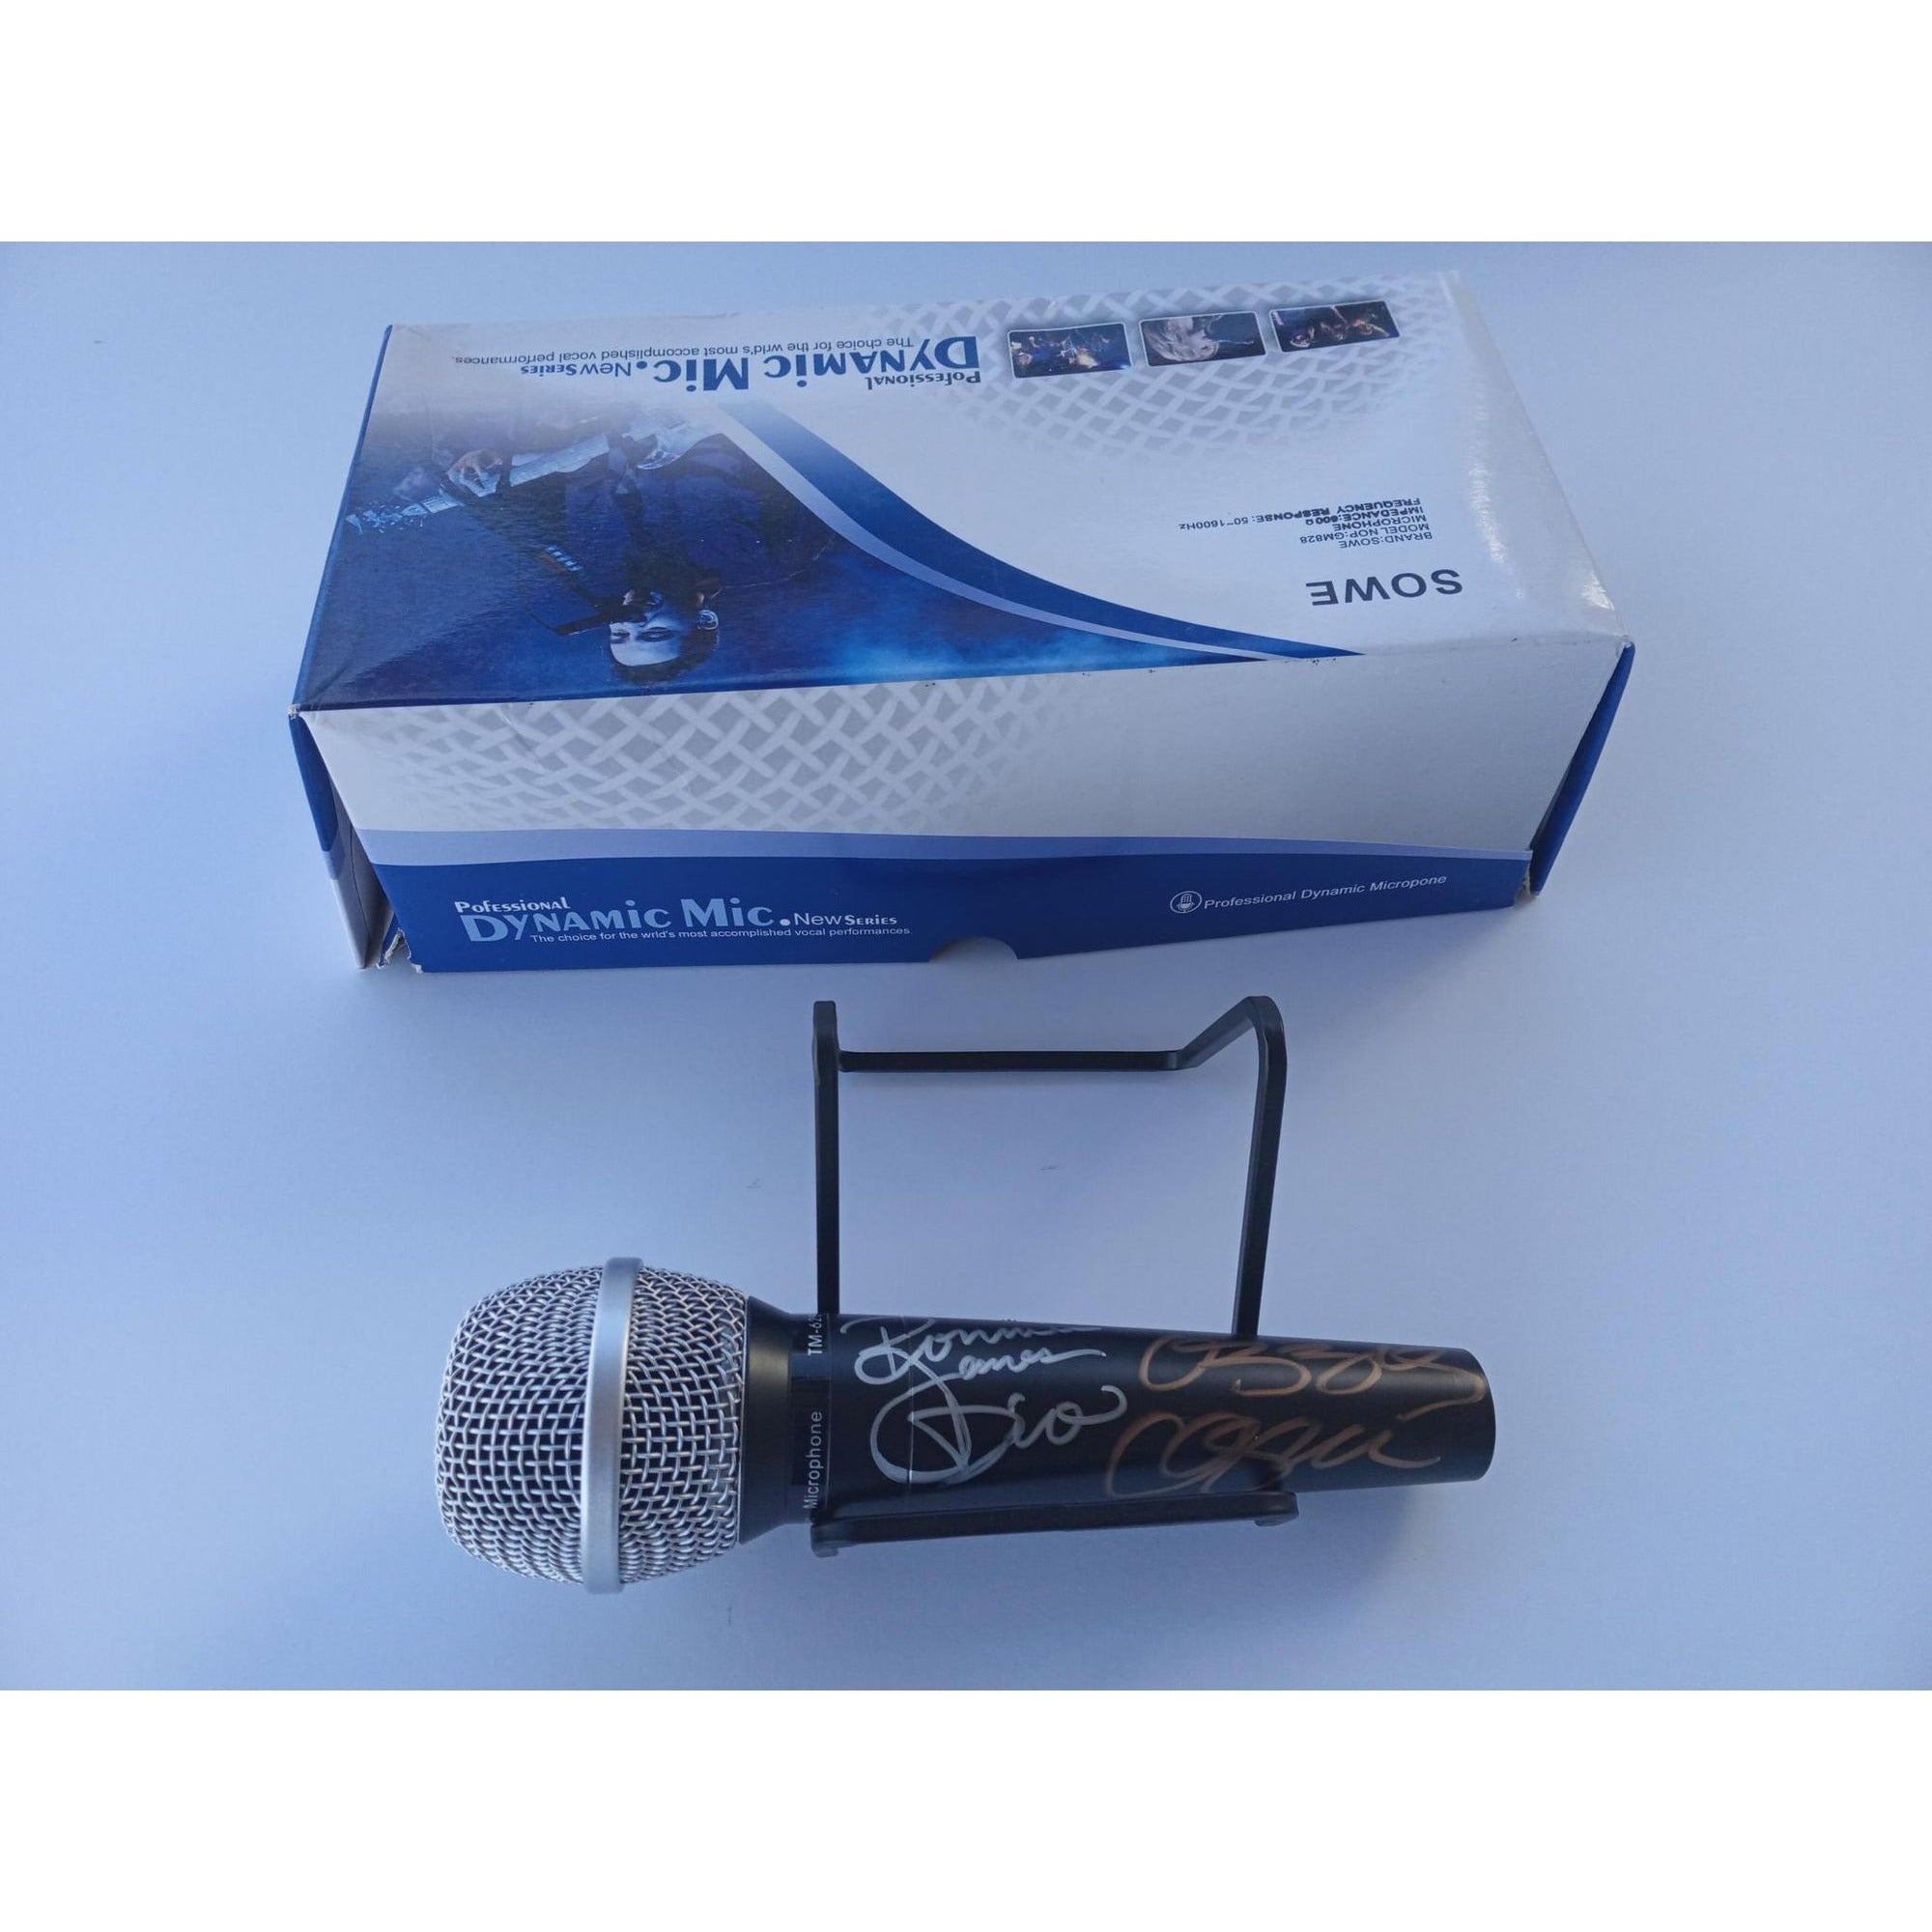 David Crosby microphone signed with proof